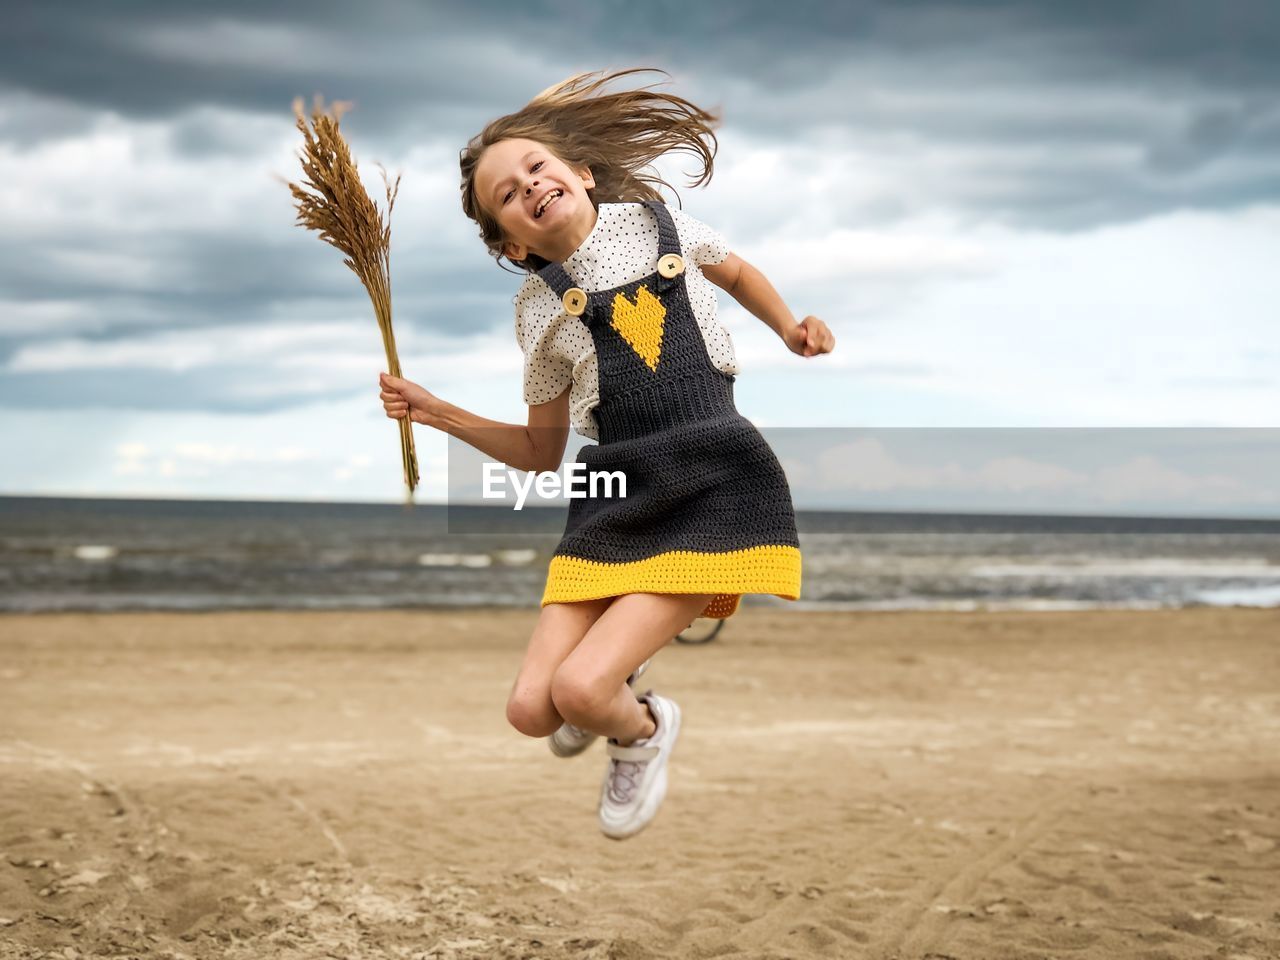 Portrait of happy girl jumping at beach